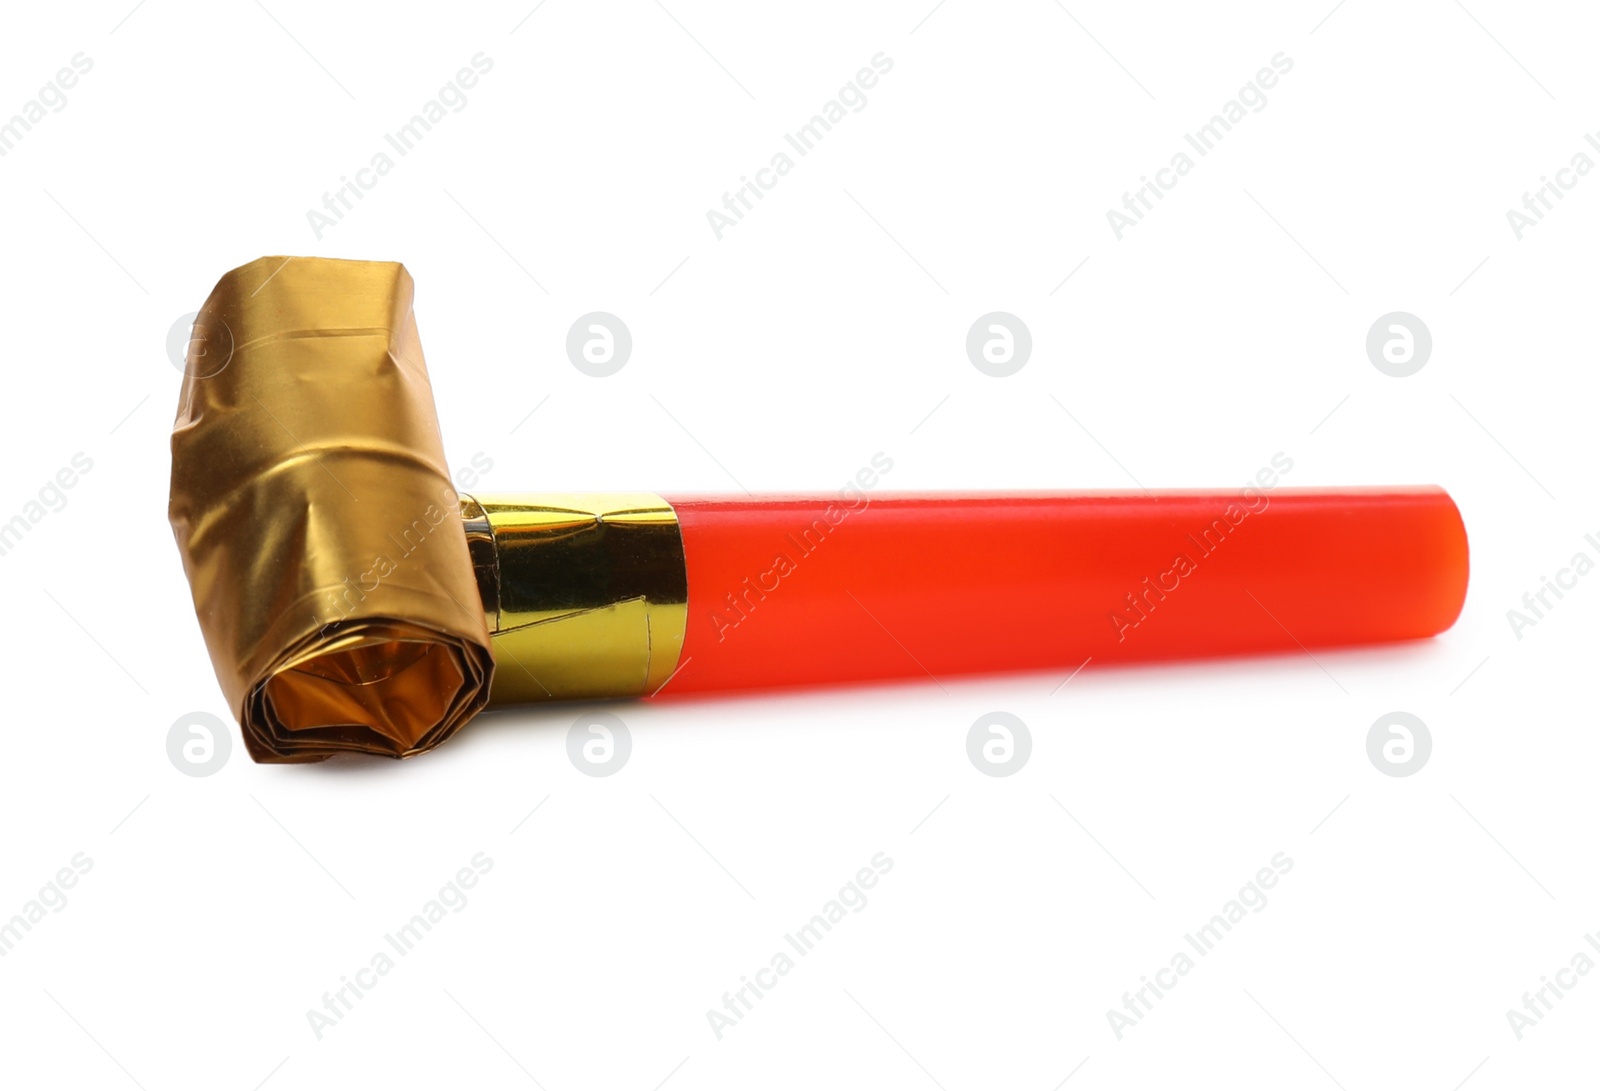 Photo of Bright party blower isolated on white. Festive item